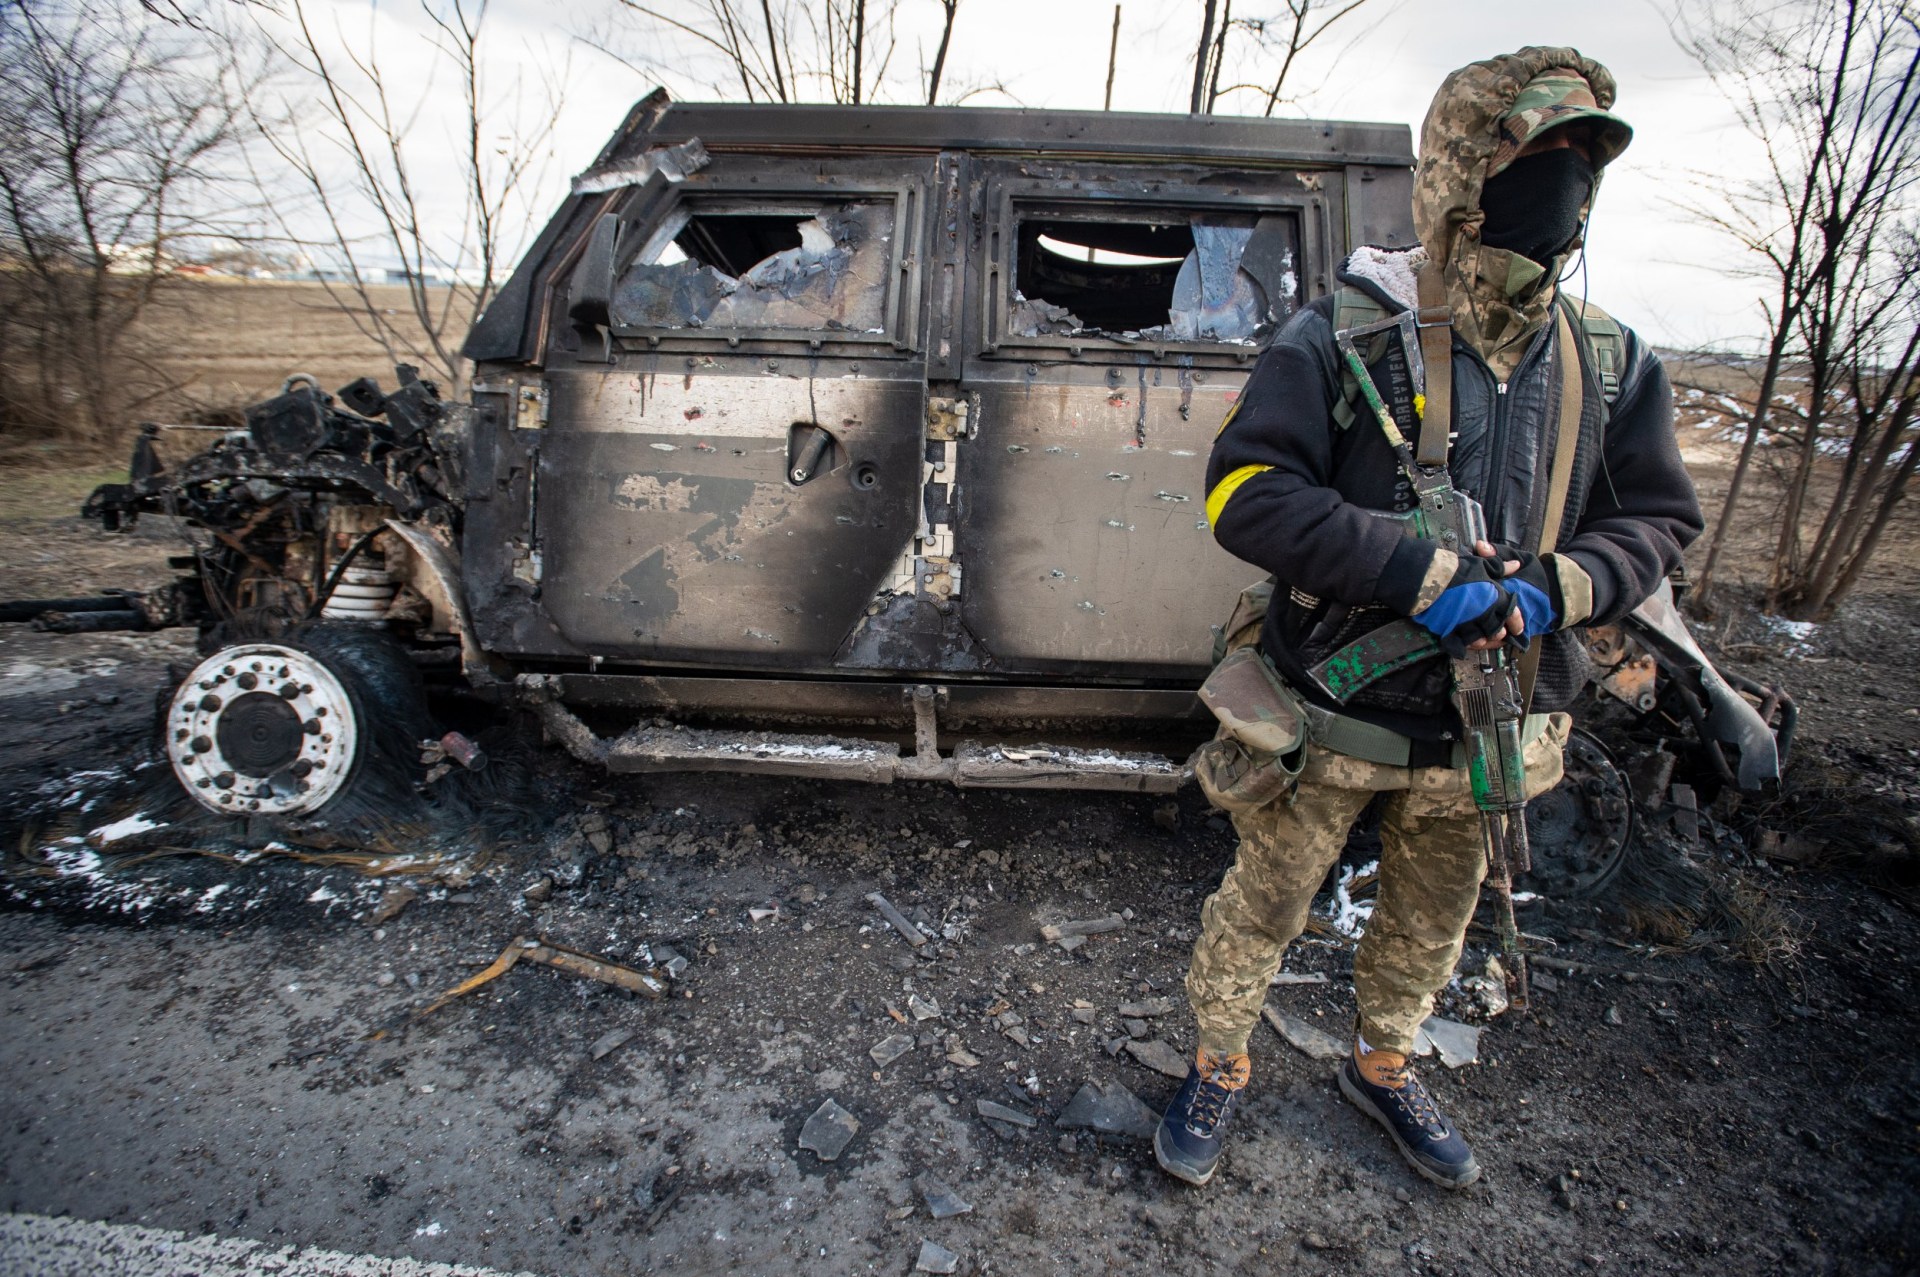 ukrainian military chief says frontline situation is getting ‘significantly worse’